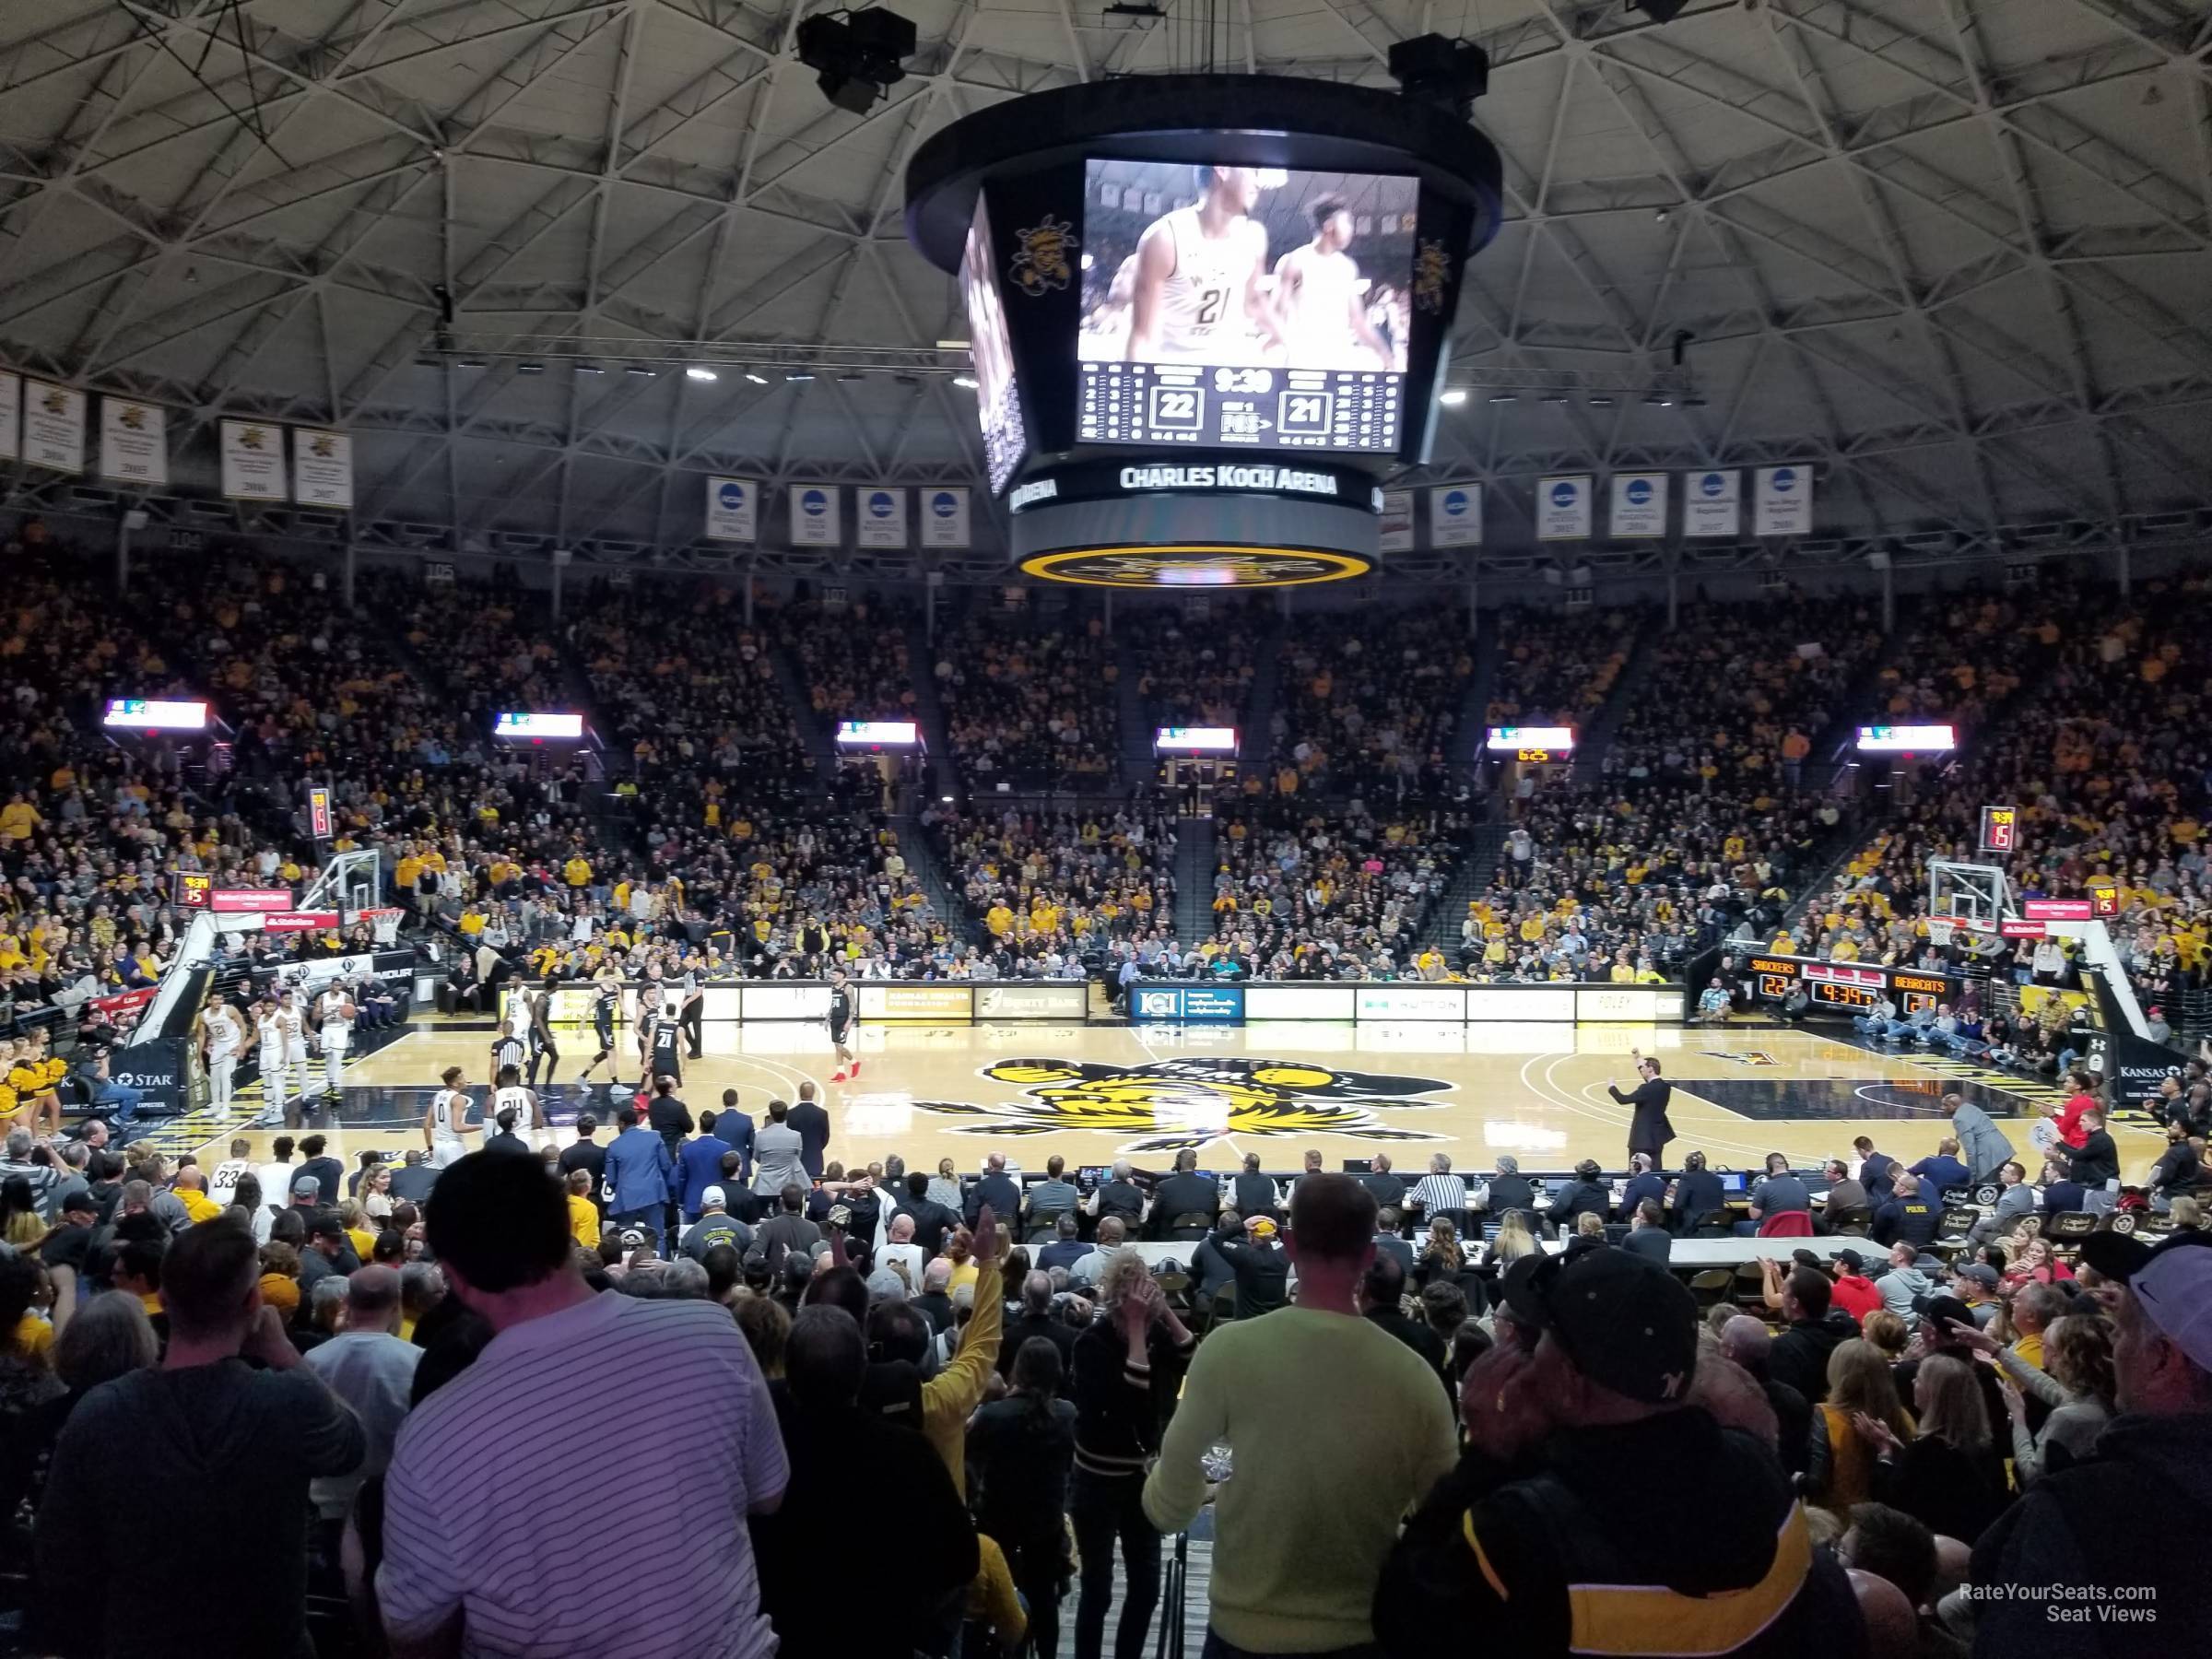 section 121, row 14 seat view  - charles koch arena